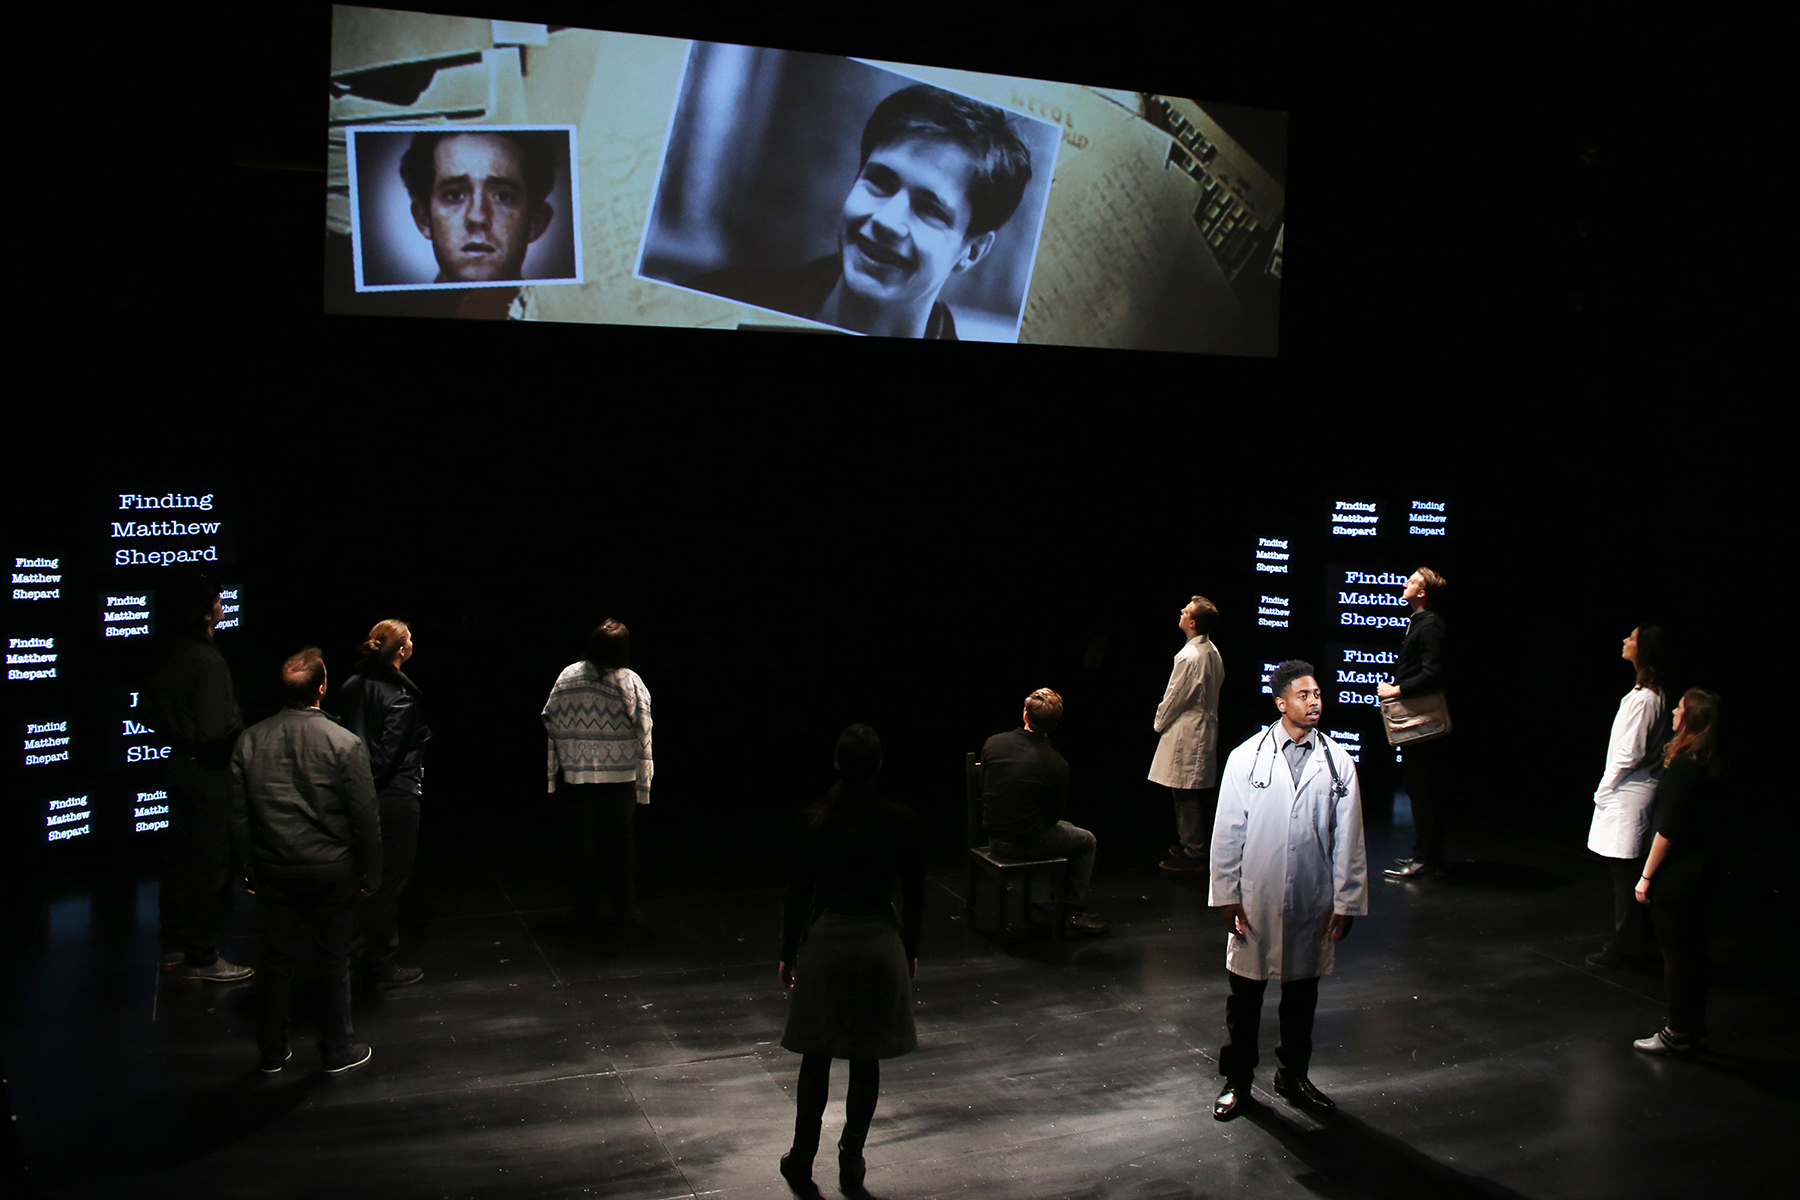 THE LARAMIE PROJECT by Moisés Kaufman and the members of Tectonic Theatre Project onstage in Connecticut Repertory Theatre’s Nafe Katter Theatre from October 8-18, 2015. Tickets and Info at crt.uconn.edu. Photo by Gerry Goodstein